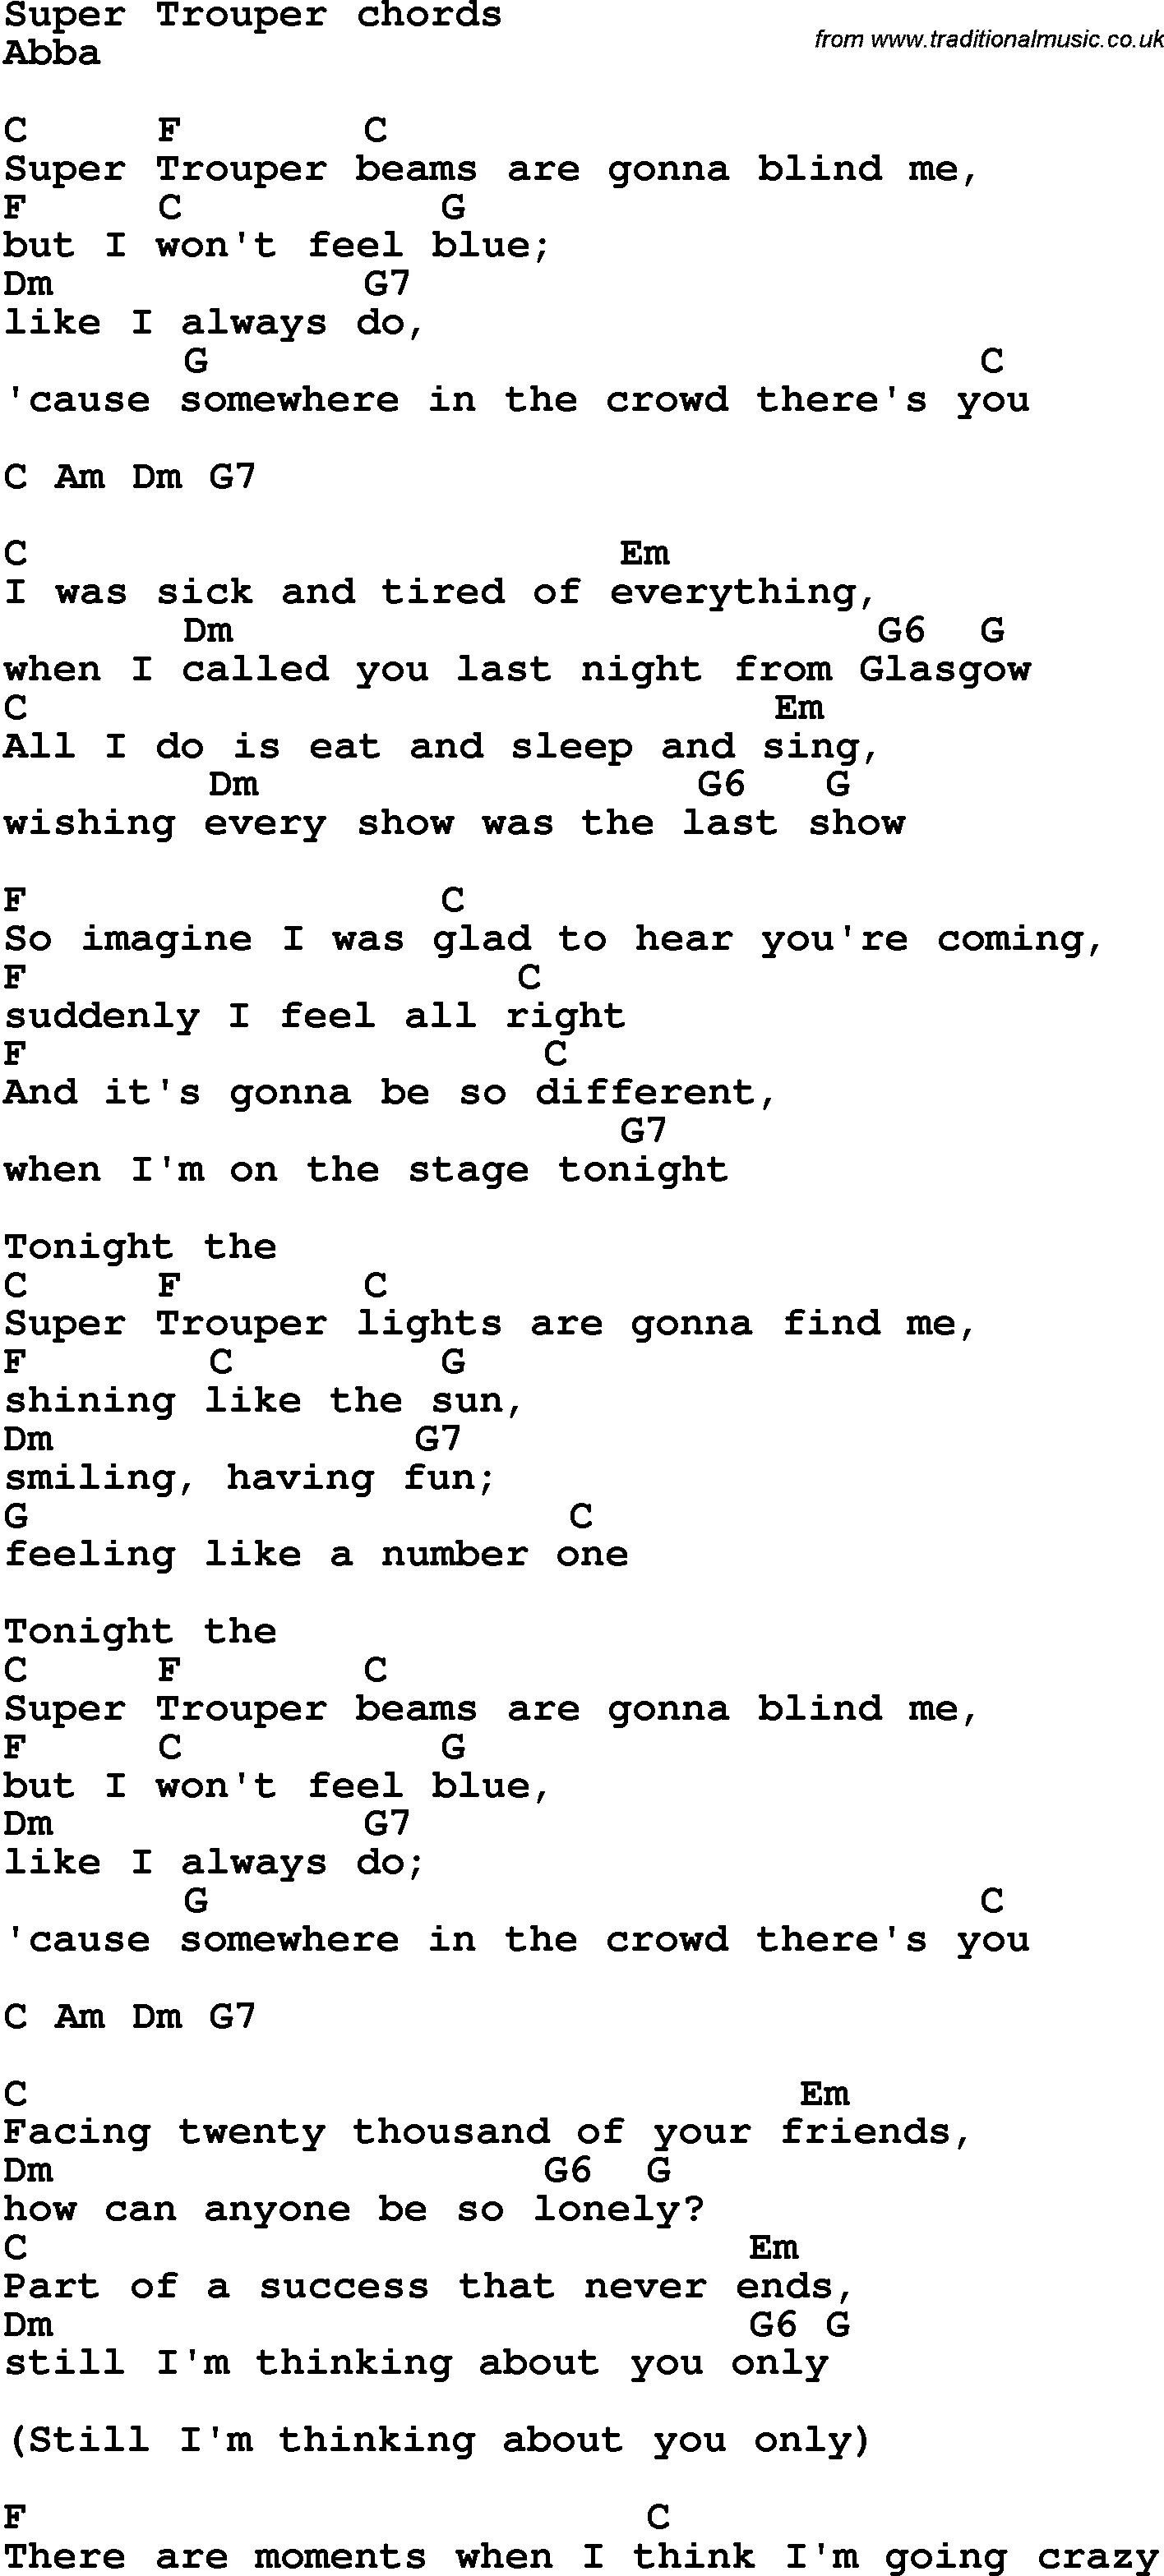 Song Lyrics with guitar chords for Super Trouper